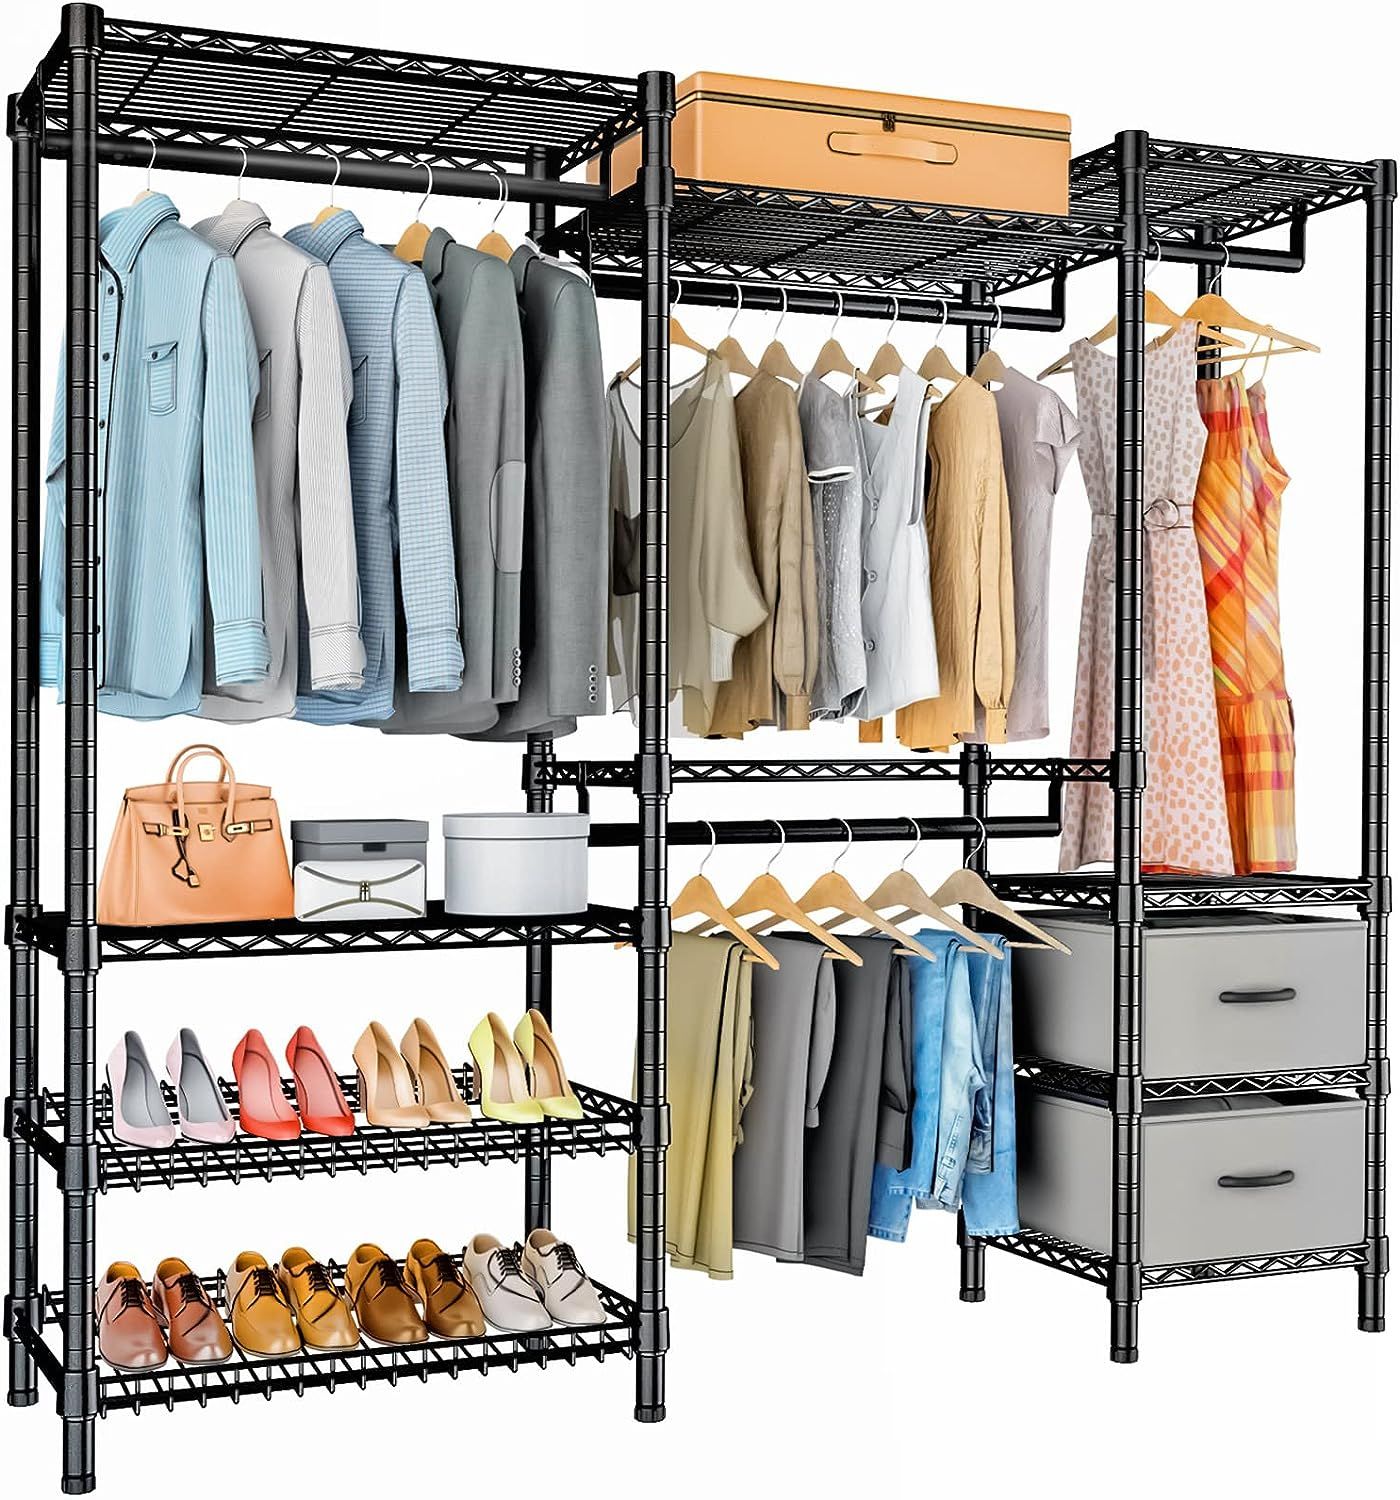 Vipek V8 Wire Garment Rack 5 Tiers Heavy Duty India | Ubuy In 5 Tiers Wardrobes (View 14 of 15)